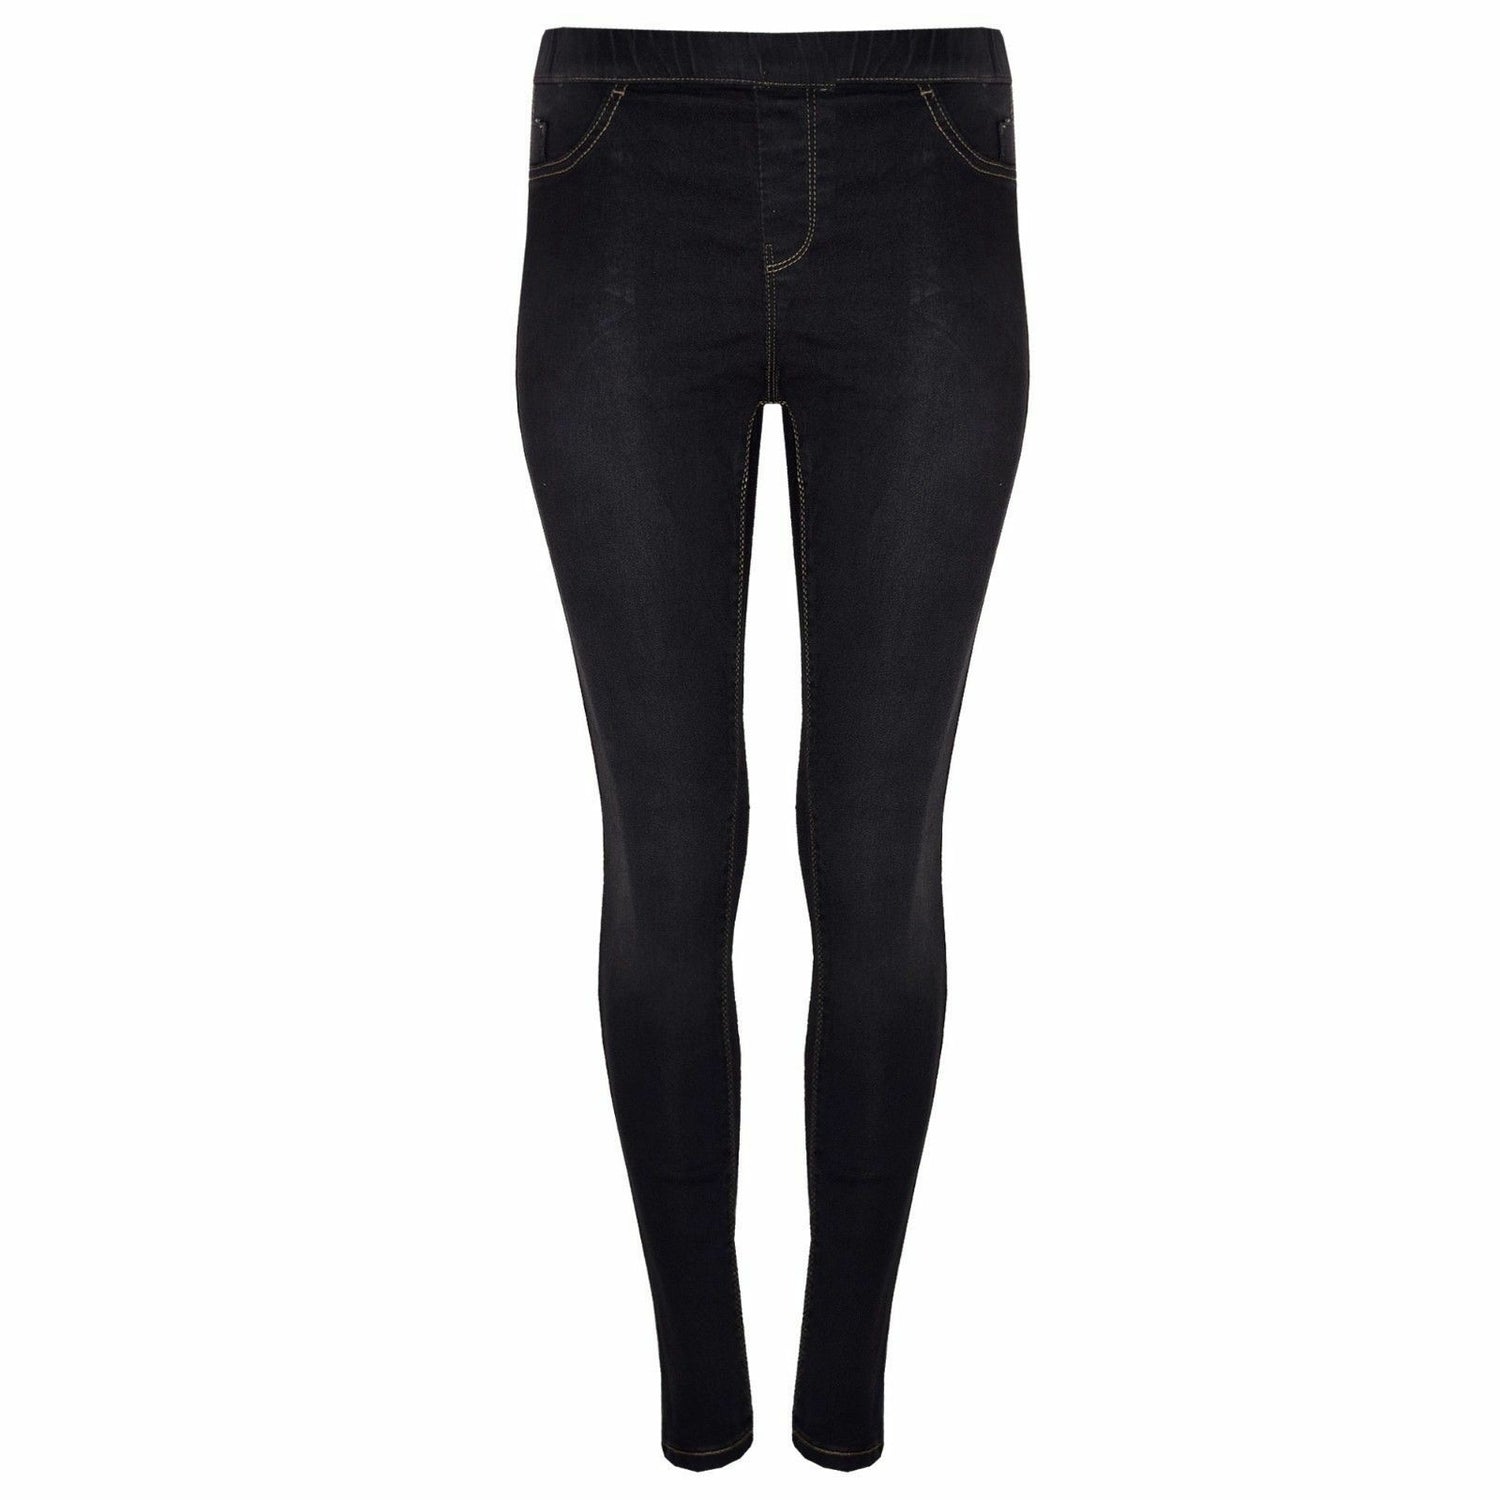 Ladies Black Denim Stretch Jeggings. They Have An Elasticated Waist And A stretch Fit. Sizes 8-18 Available.